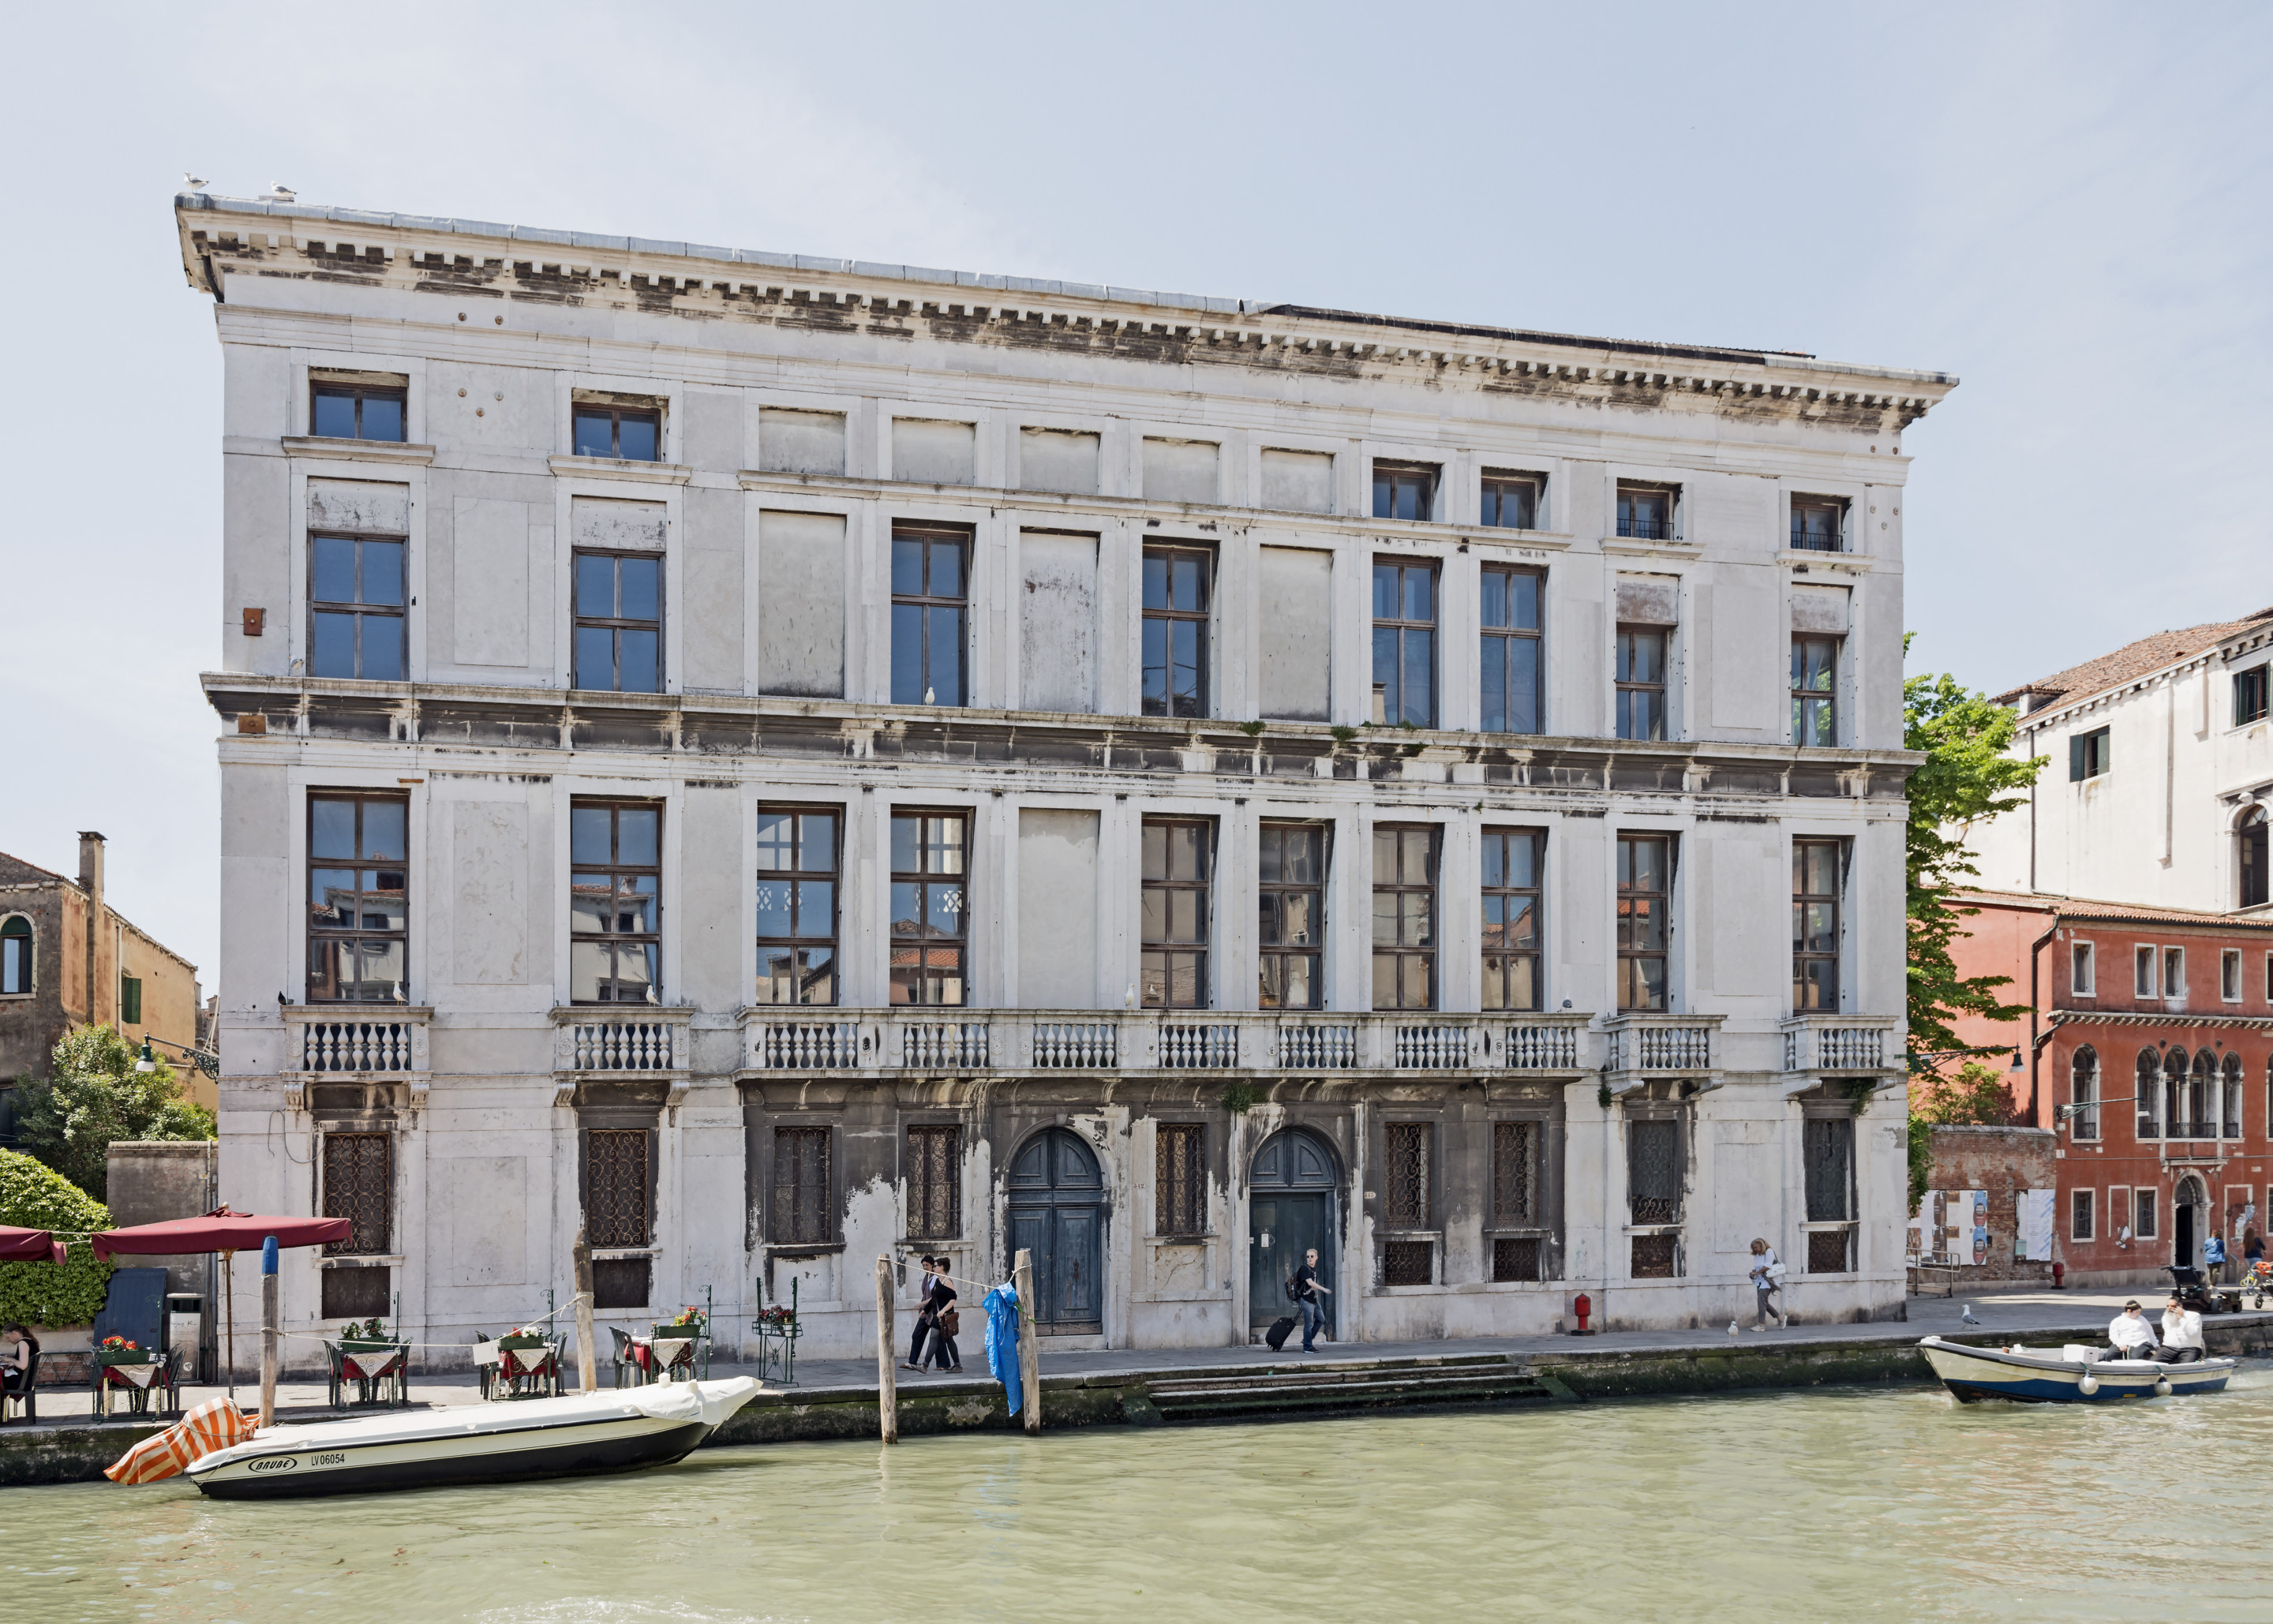 The Palazzo Priuli Manfrin in Venice, soon to be the new home of the Anish Kapoor Foundation